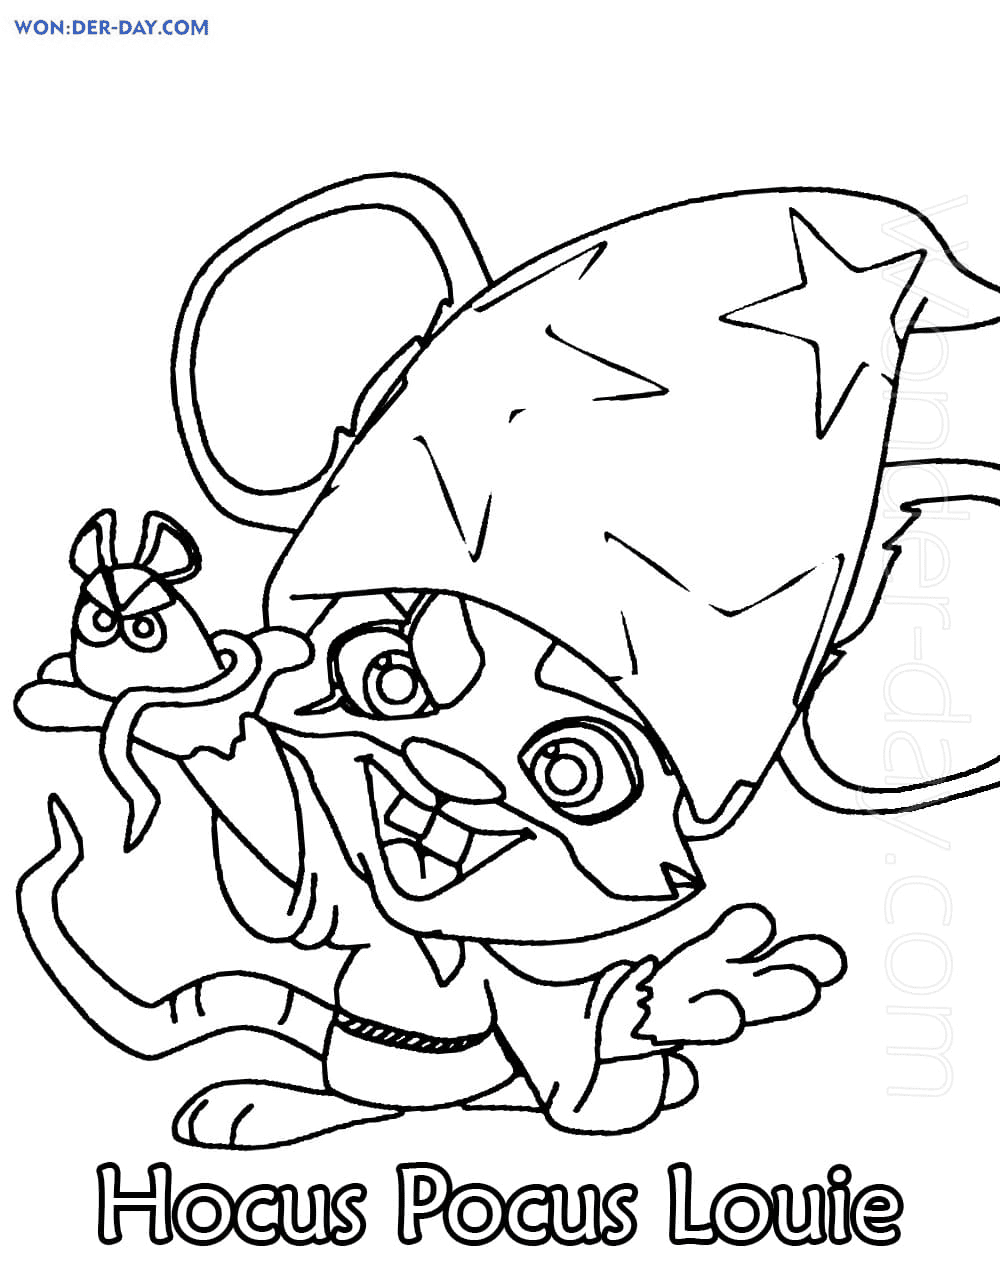 Hocus Pocus Louie Zooba Coloring Page